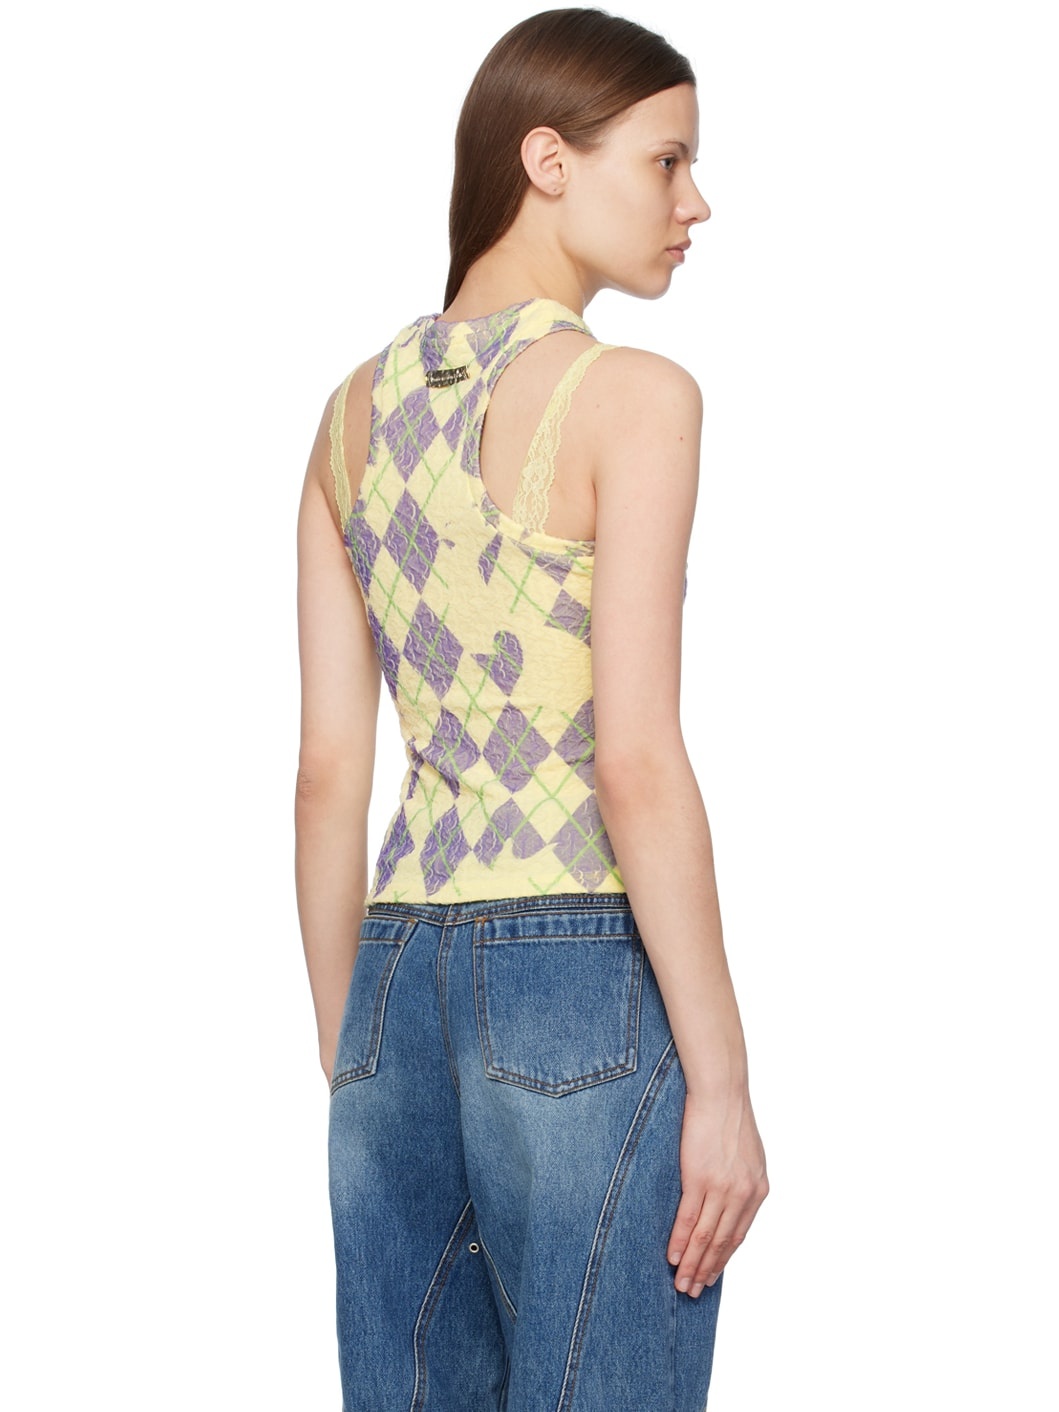 SSENSE Exclusive Yellow Puffy Heart Saver Tank Top - 3